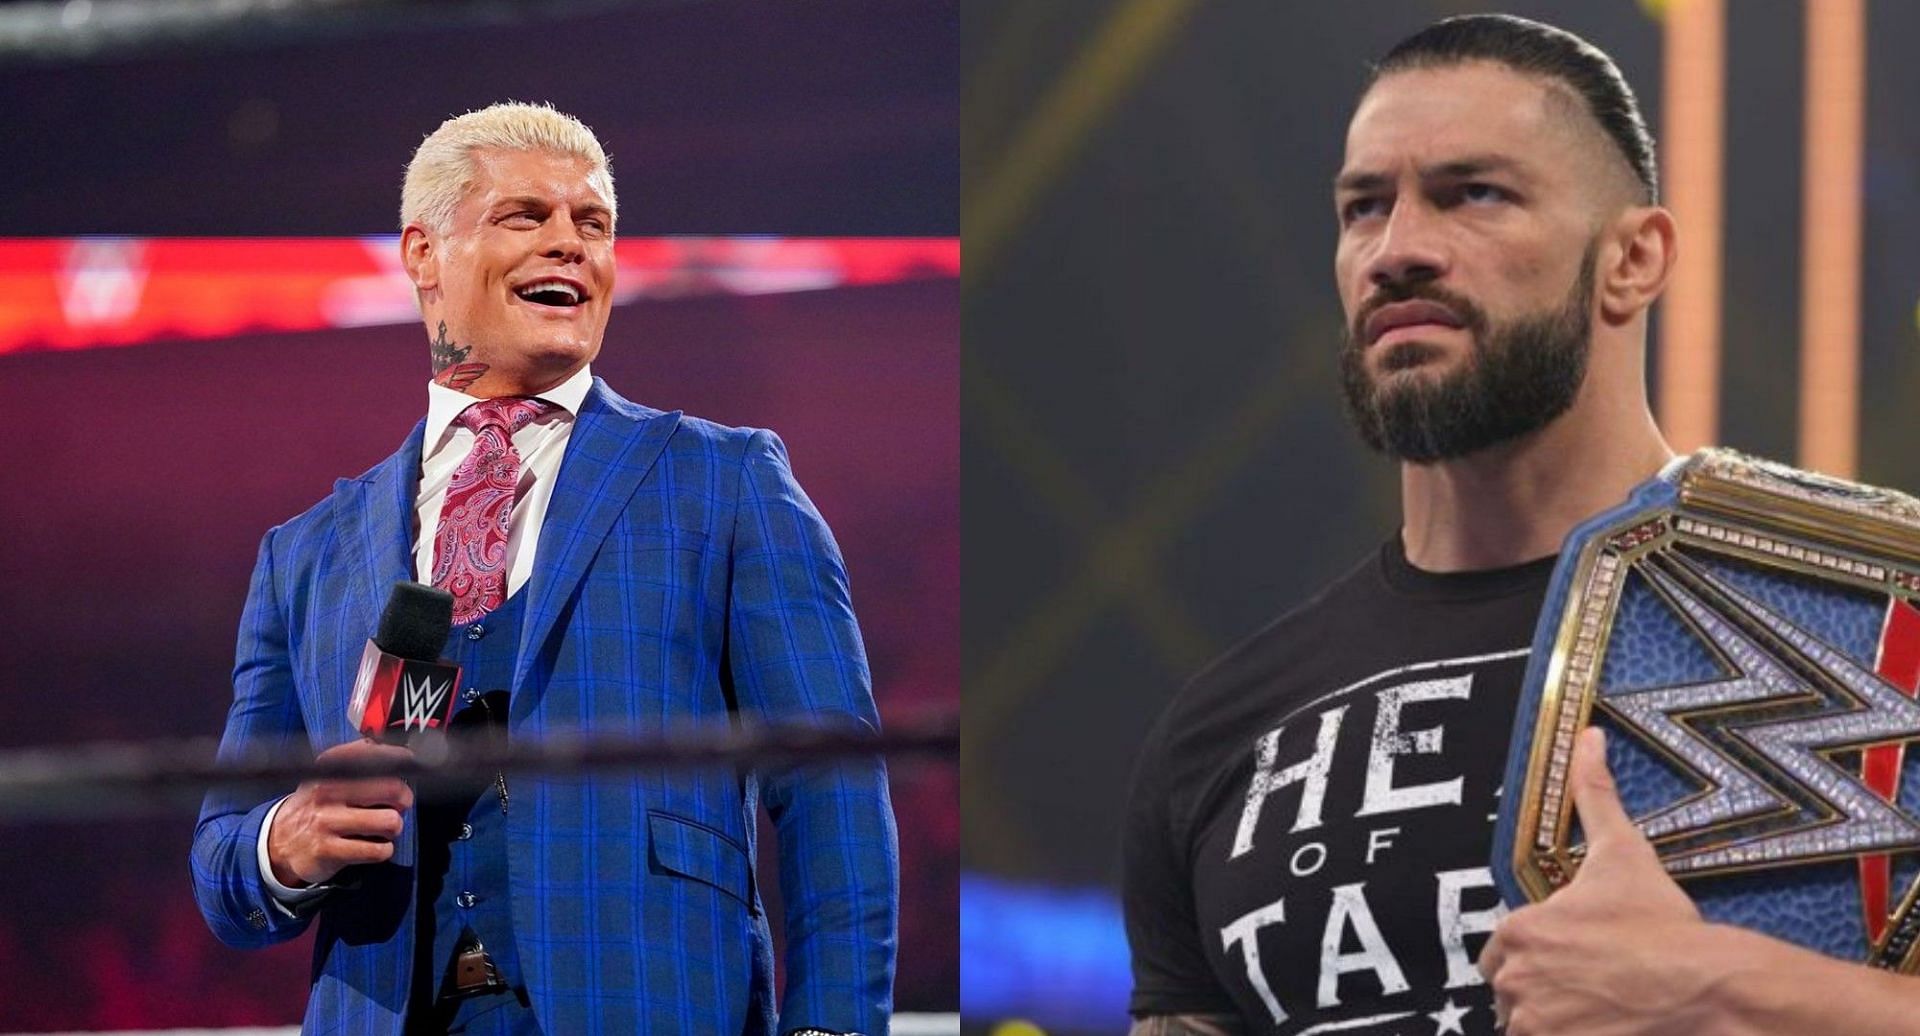 Cody Rhodes and Roman Reigns are set to confront each other tonight